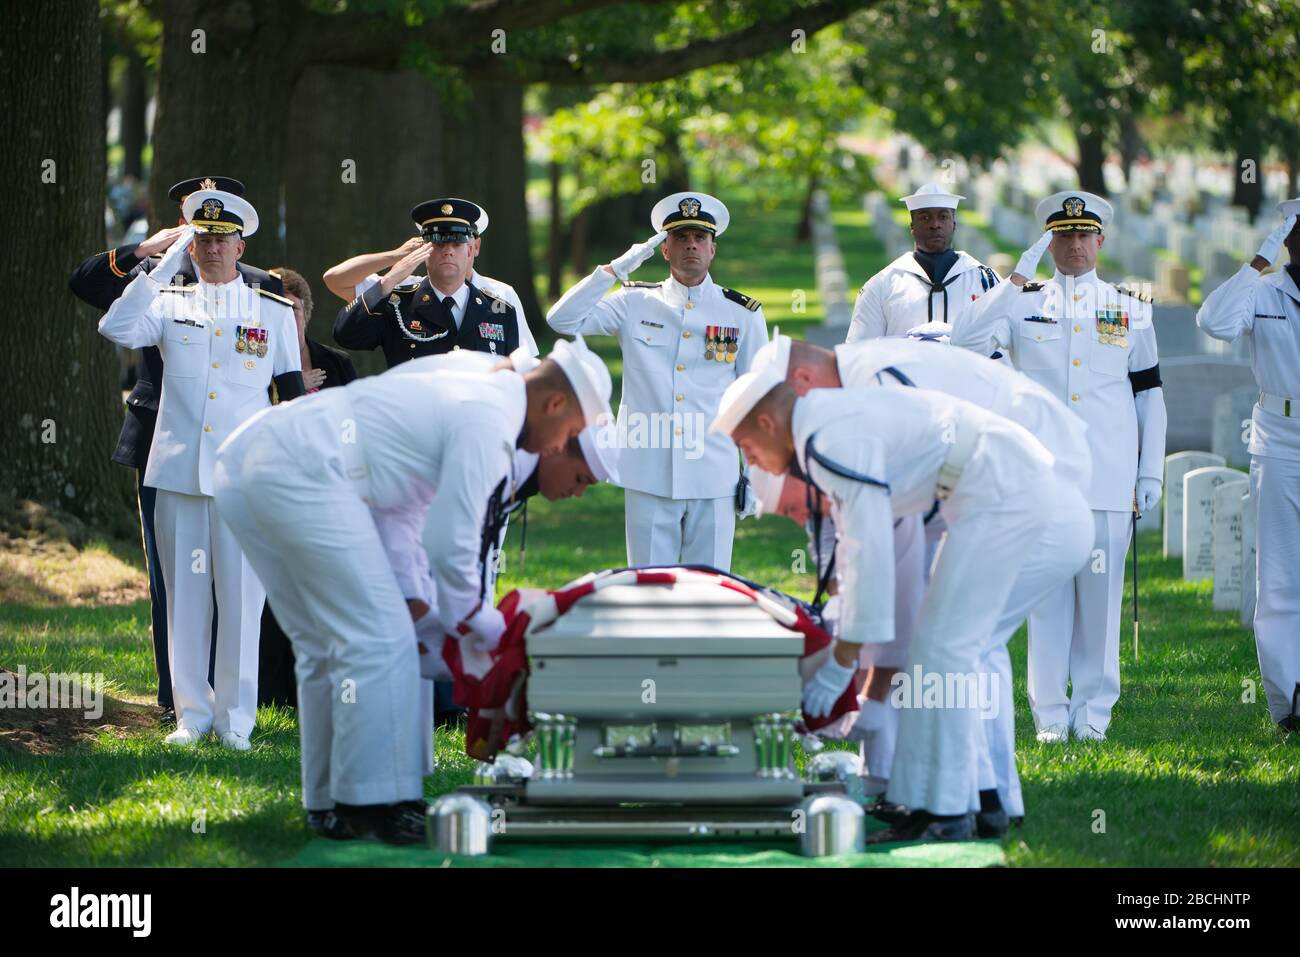 'The U.S. Navy Honor Guard participates in the graveside service for U.S. Navy Petty Officer 1st Class Xavier A. Martin at Arlington National Cemetery, Arlington, Va., Aug. 9, 2017.  Martin perished when the USS Fitzgerald (DDG 62) was involved in a collision with the Philippine-flagged merchant vessel ACX Crystal, flooding the berthing compartment he was occupying.  Martin was buried with standard honors in Section 60. (U.S. Army photo by Elizabeth Fraser / Arlington National Cemetery / released); 9 August 2017, 15:10; Funeral for U.S. Navy Petty Officer 1st Class Xavier A. Martin at Arlingto Stock Photo